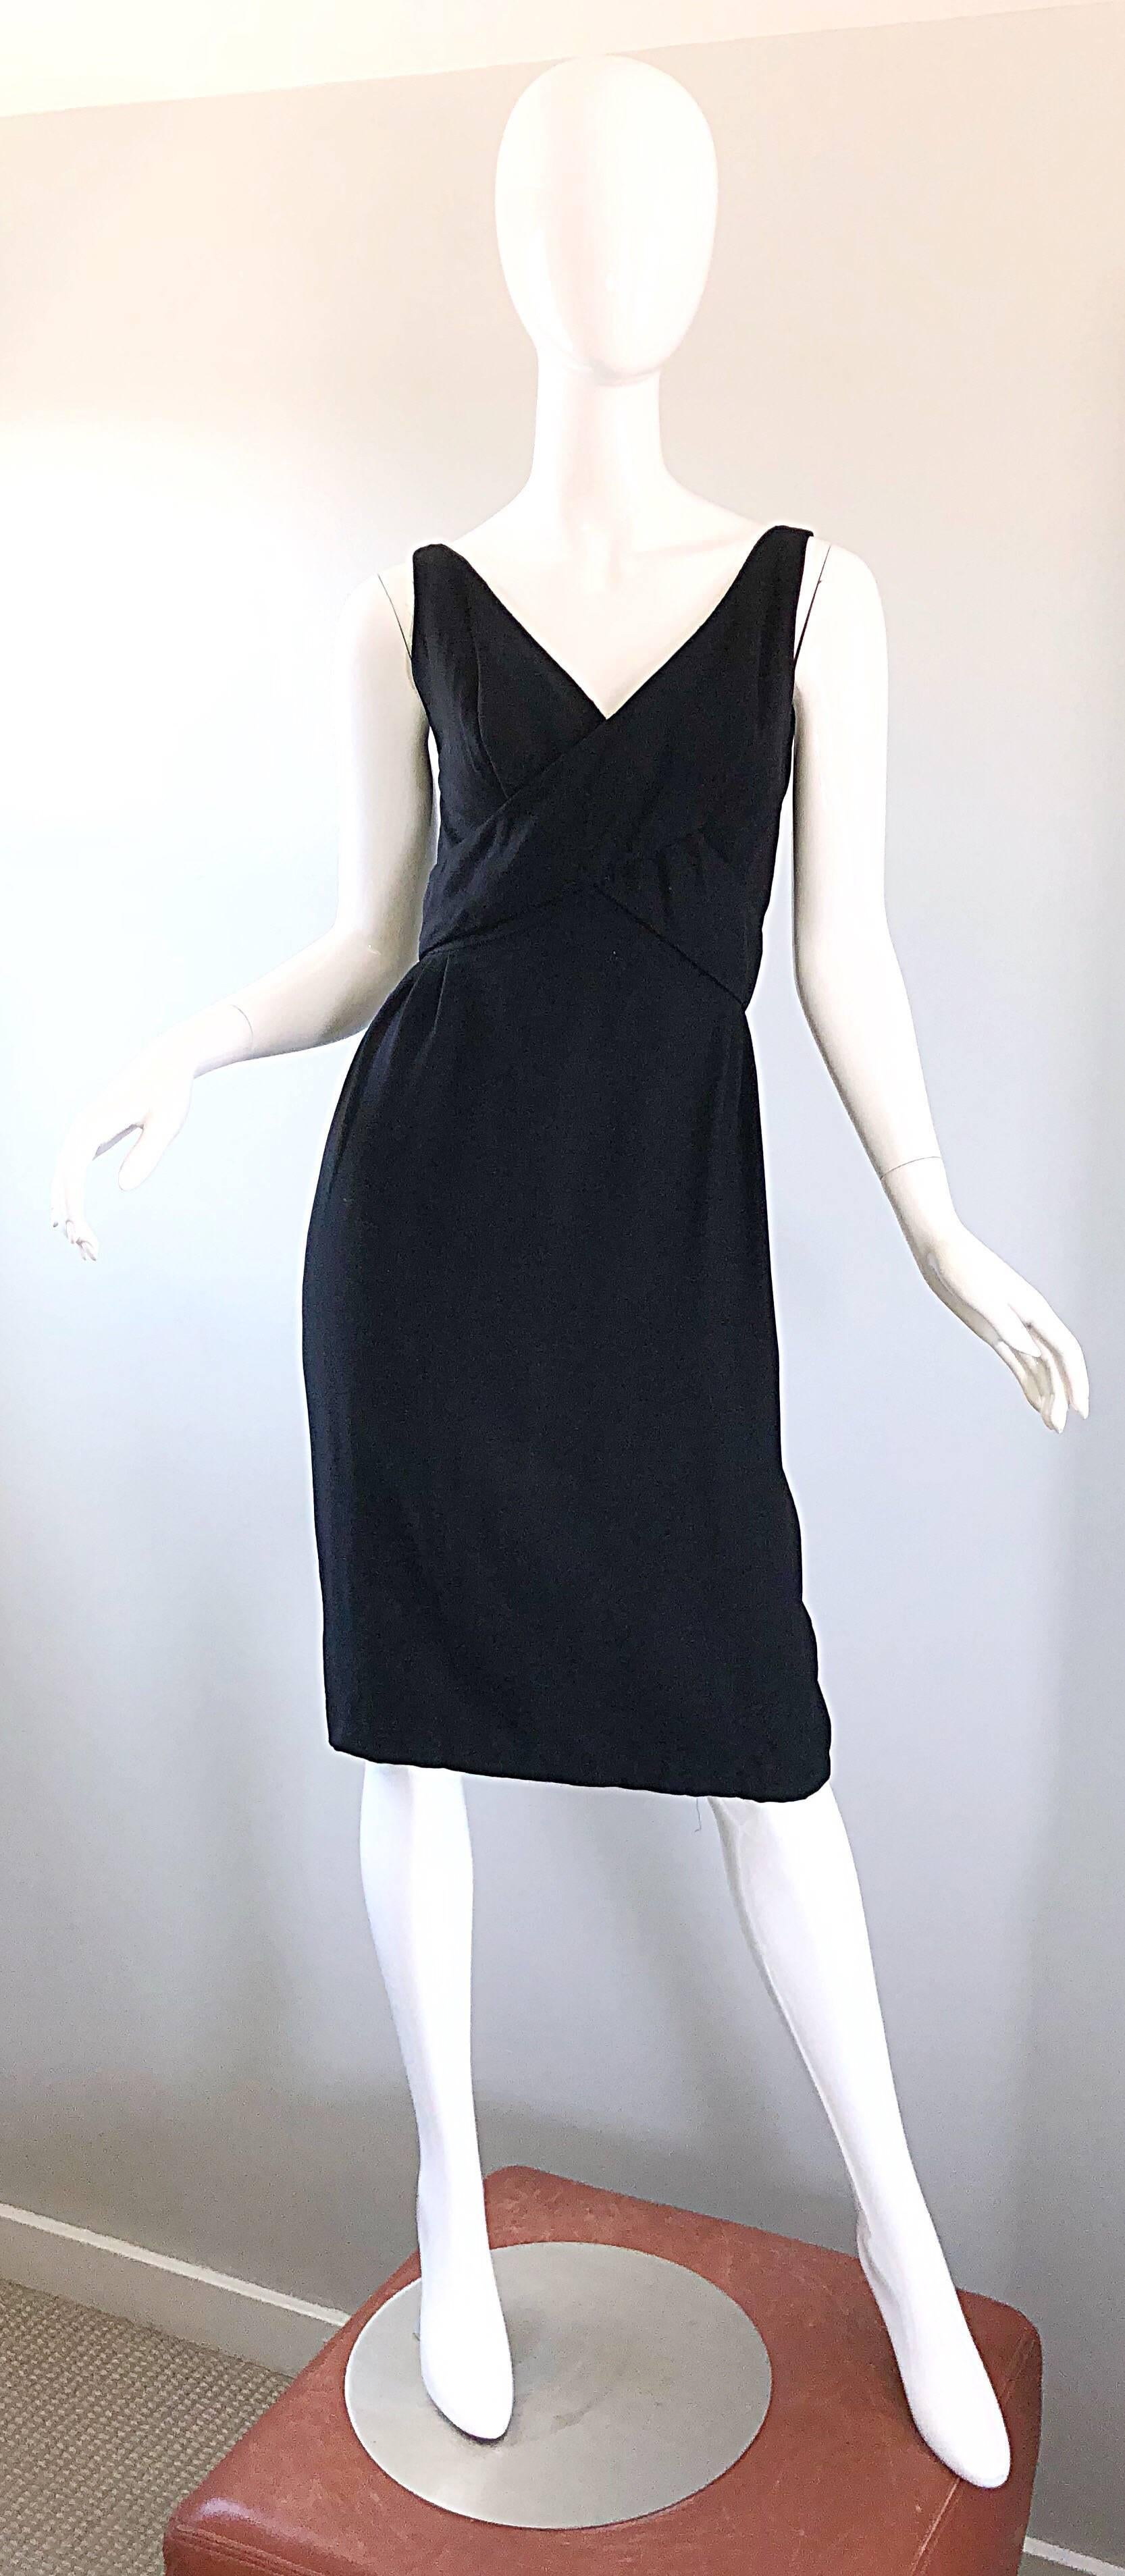 Perfect late 1950s black crepe sleeveless dress! The perfect LBD that is an essential timeless addition to any wardrobe. Features soft black crepe, with a wrap around strap that buttons shut with three fabric covered buttons at center back. Full